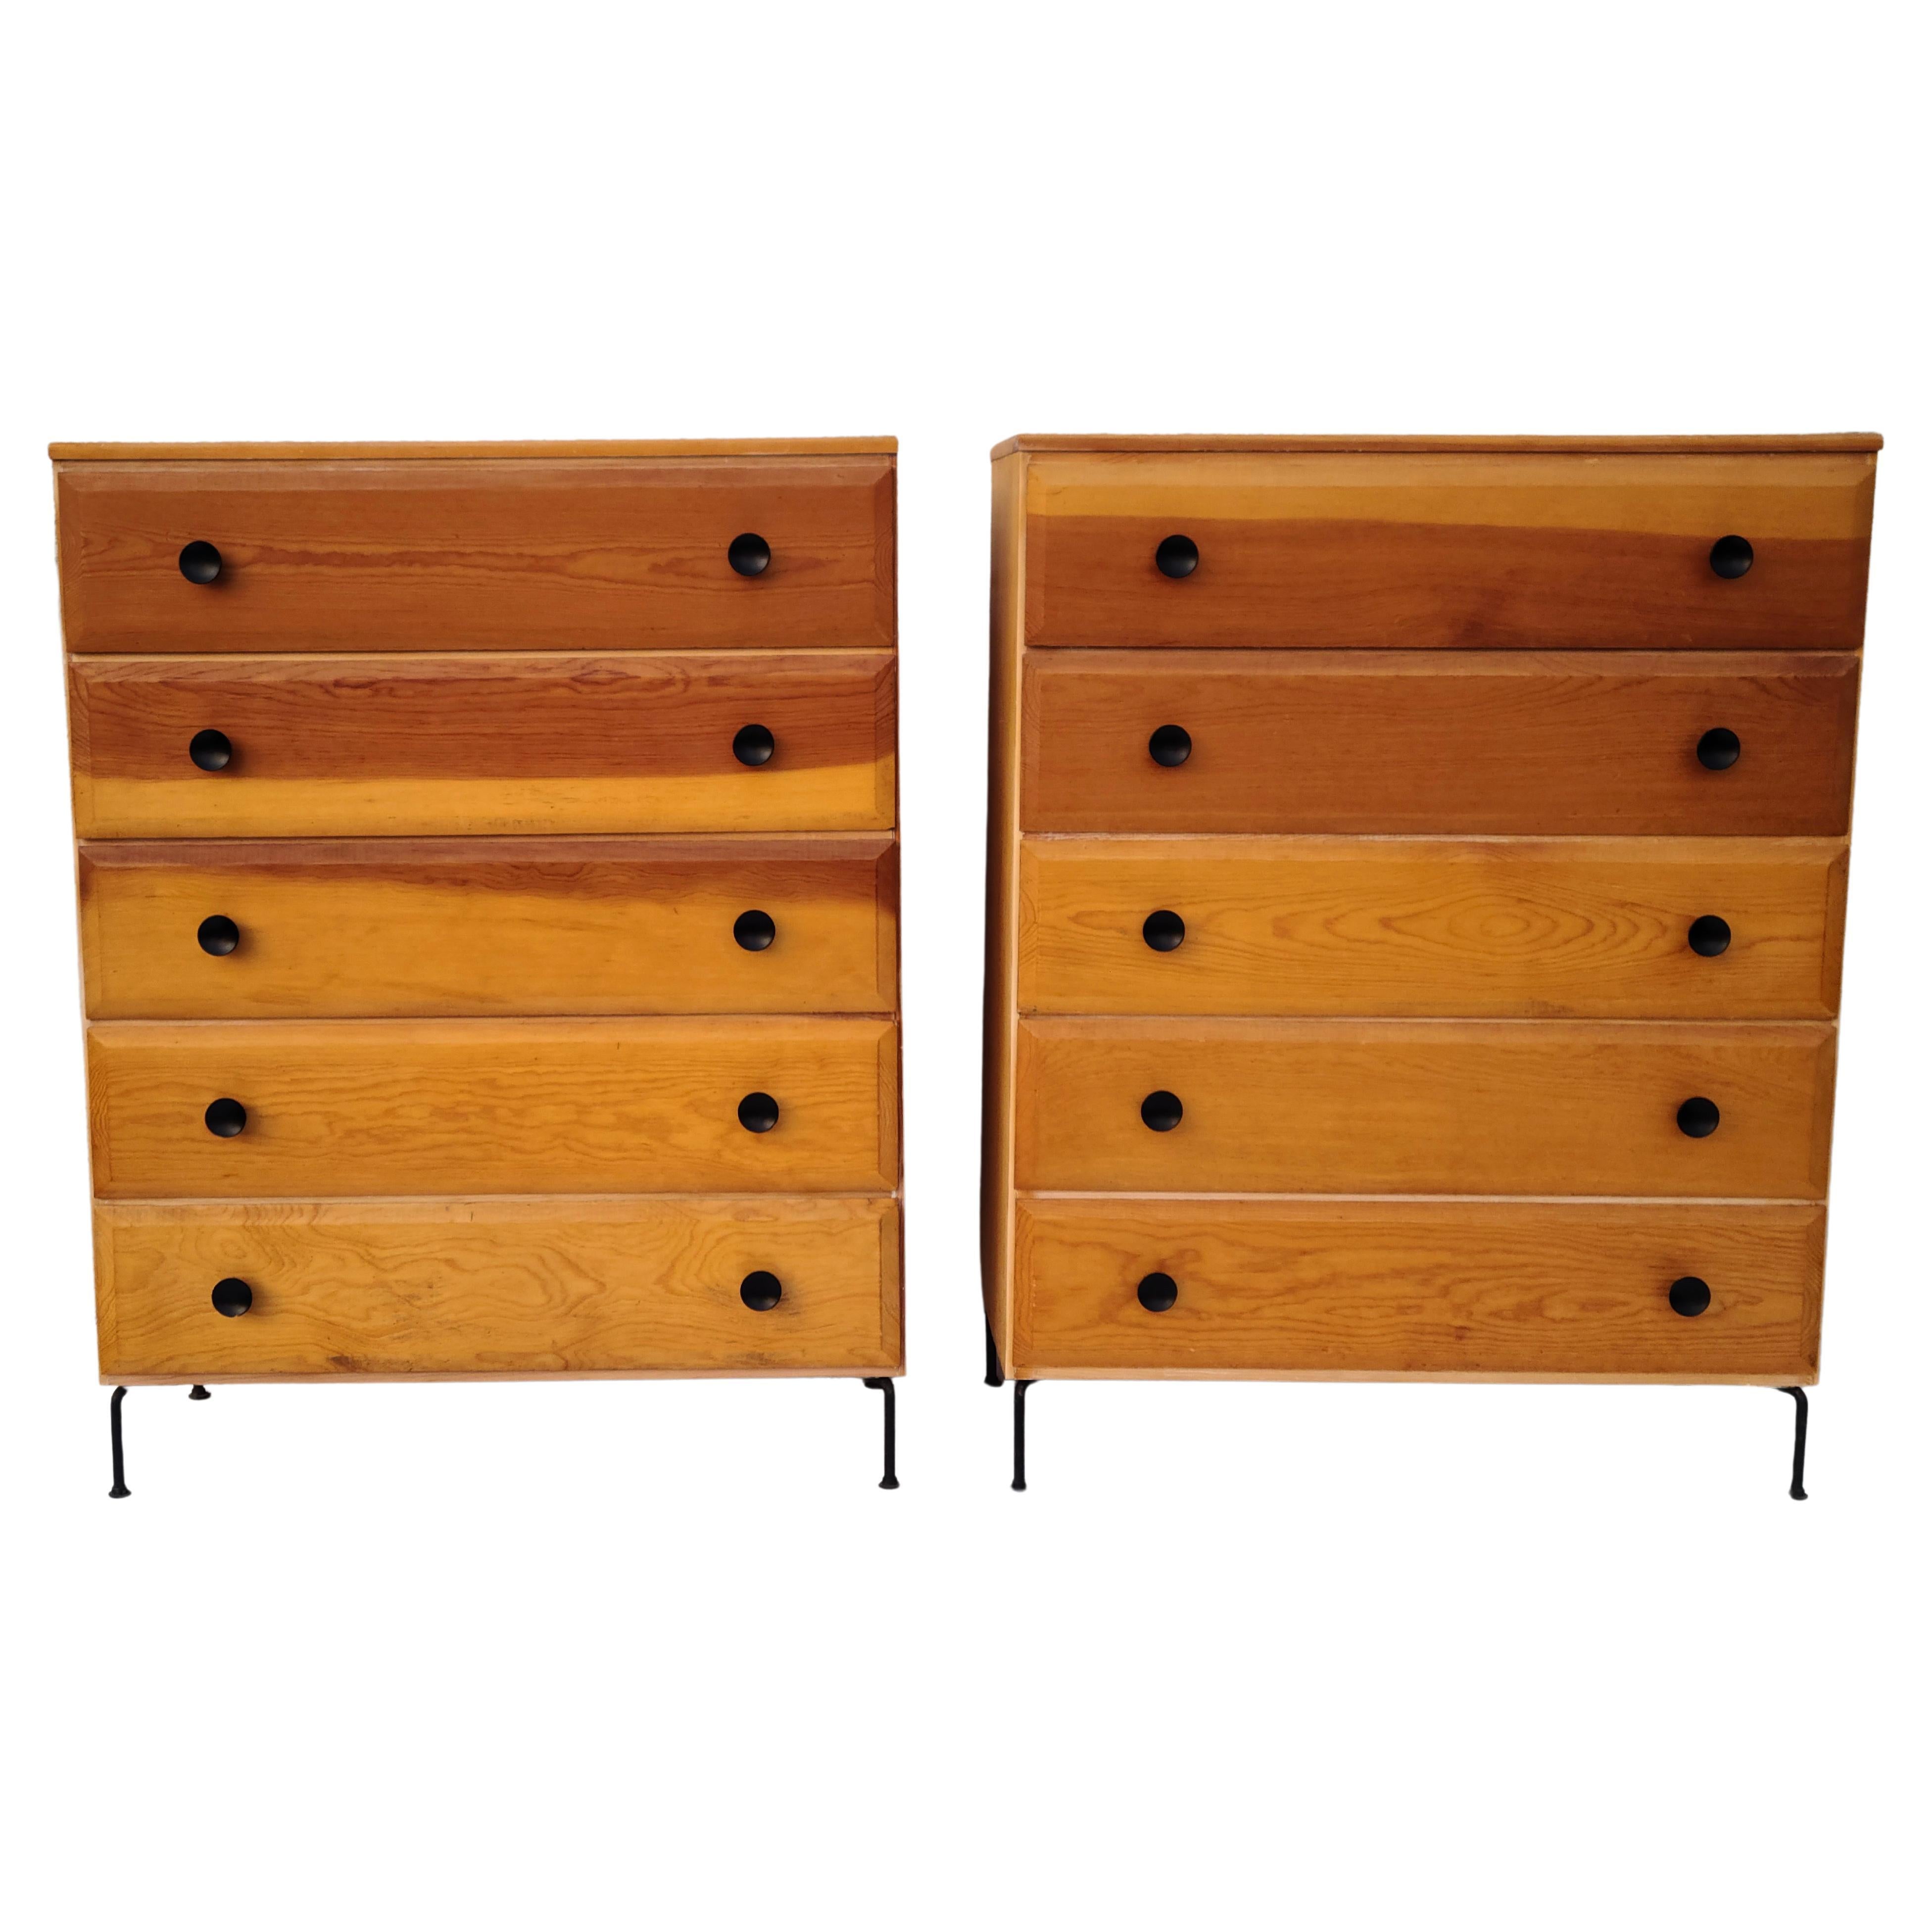 Please feel free to reach out for accurate shipping to your location.

Pair Mid Century Modern Five Drawer Chests.
Fir Wood Construction on Iron Wire Legs.
Made by Aristo Bilt.
Minimally invasive restoration with a goal of leaving a light original